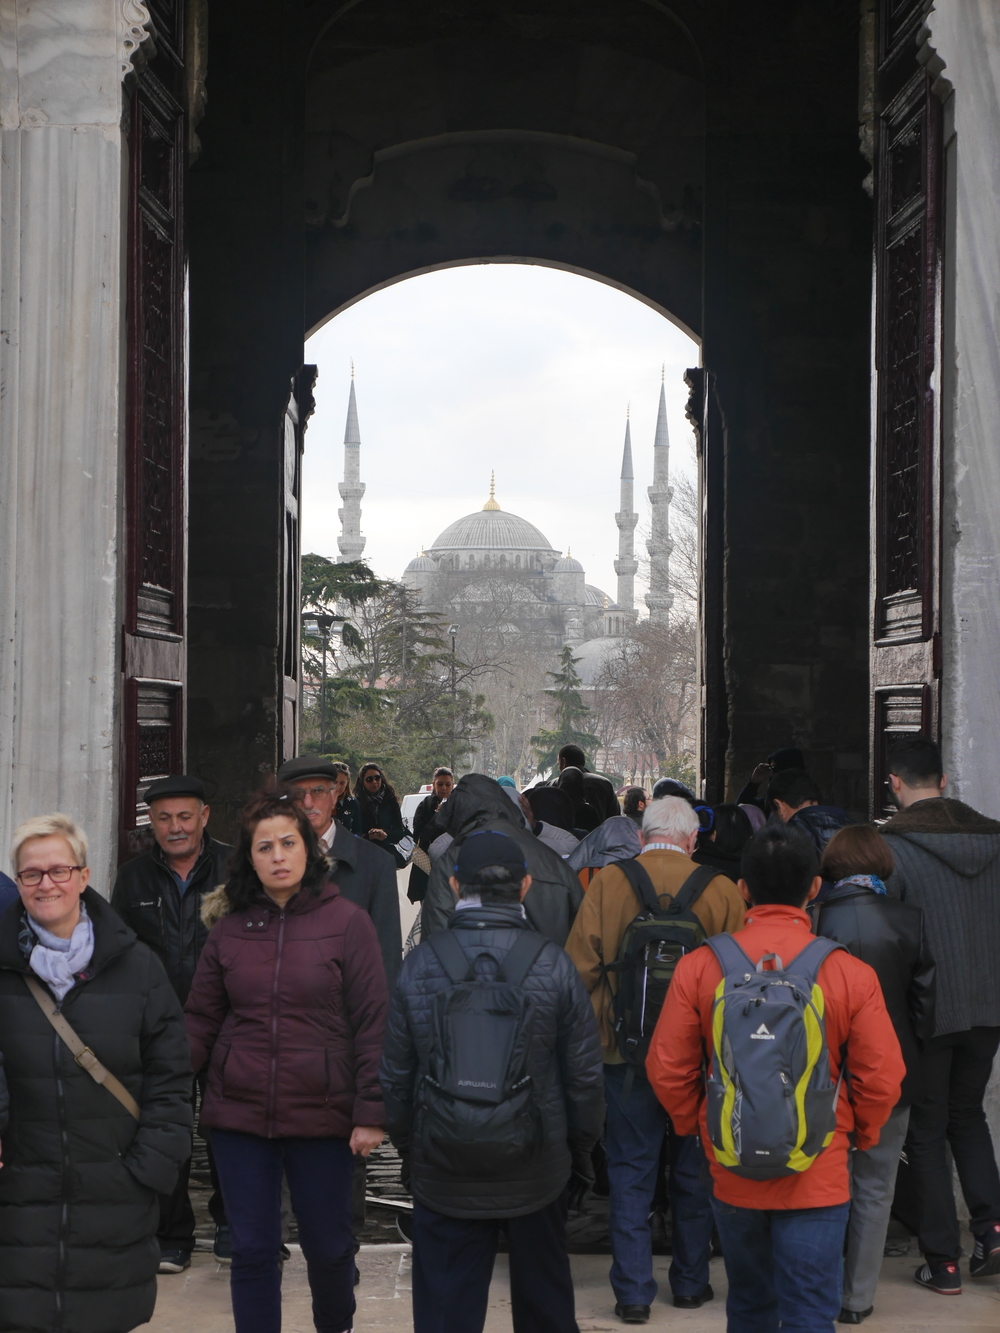  Exiting the palace grounds and heading towards the Blue Mosque. 